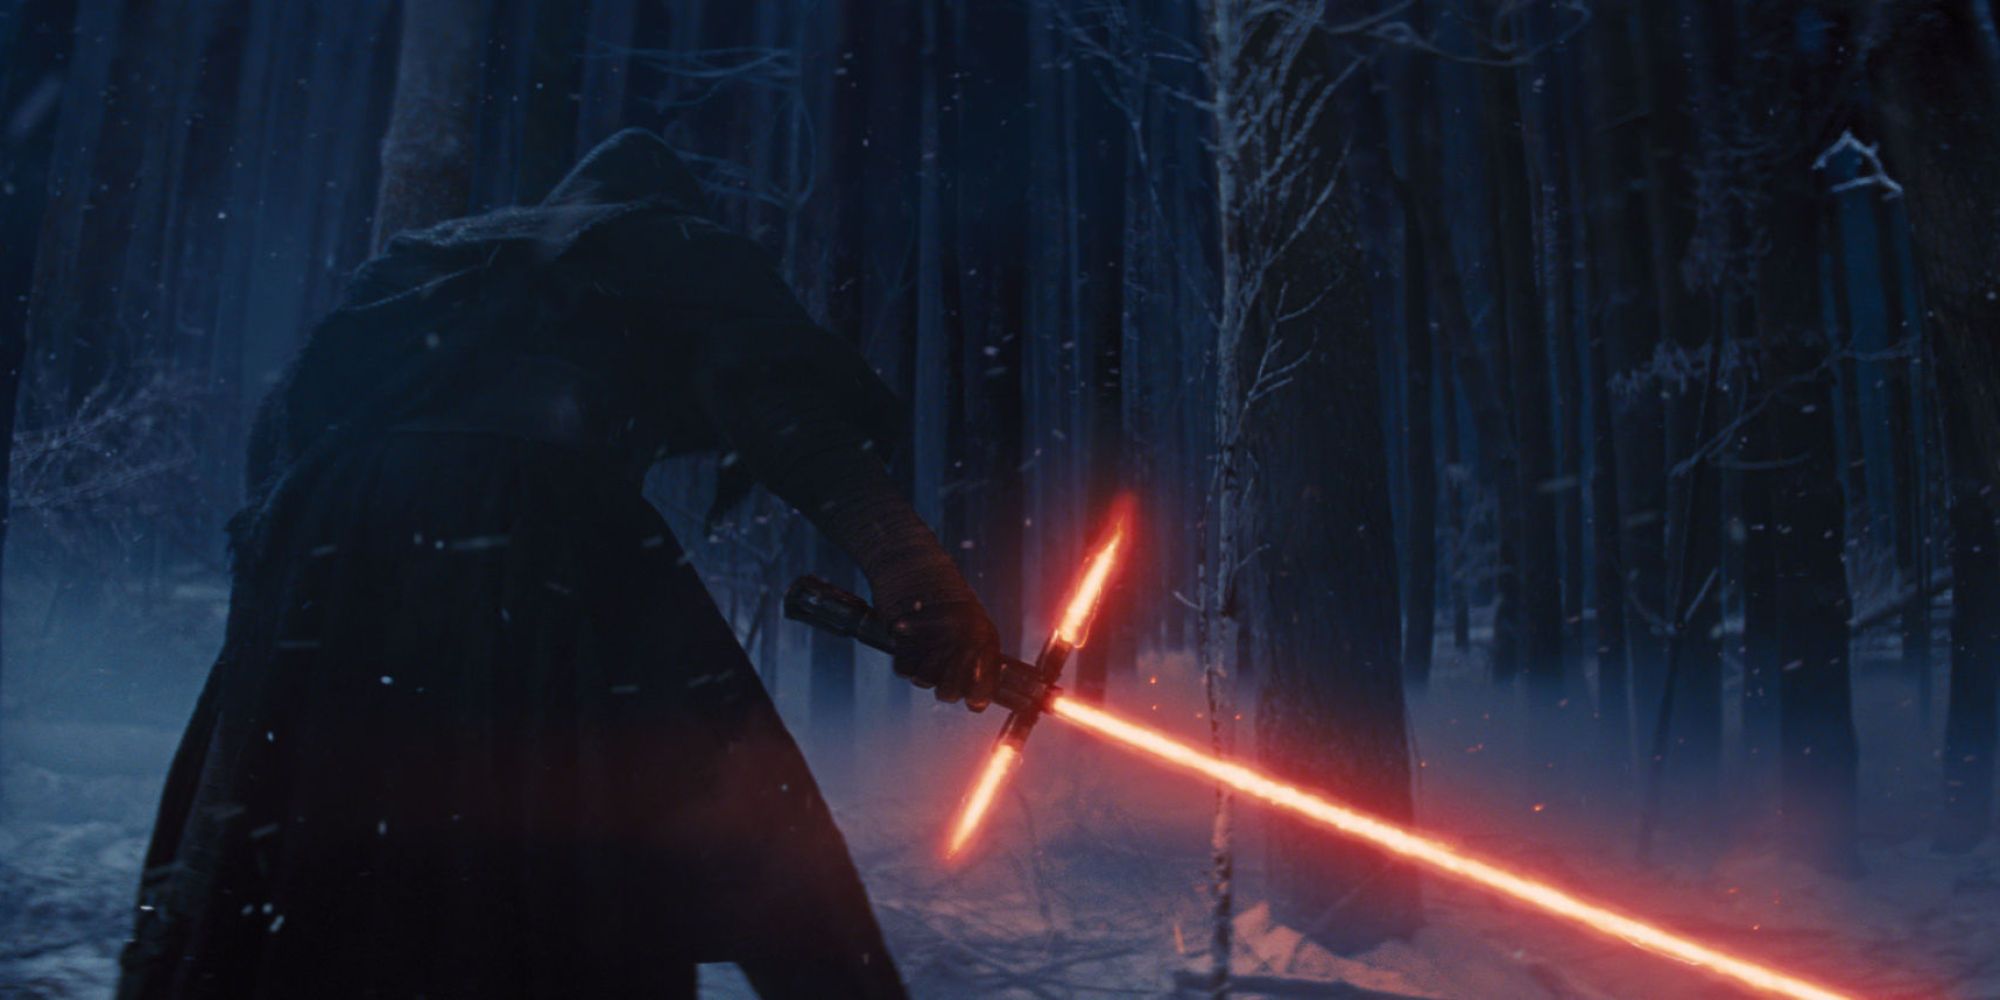 Star Wars Every Type Of Lightsaber Ranked Weakest To Strongest